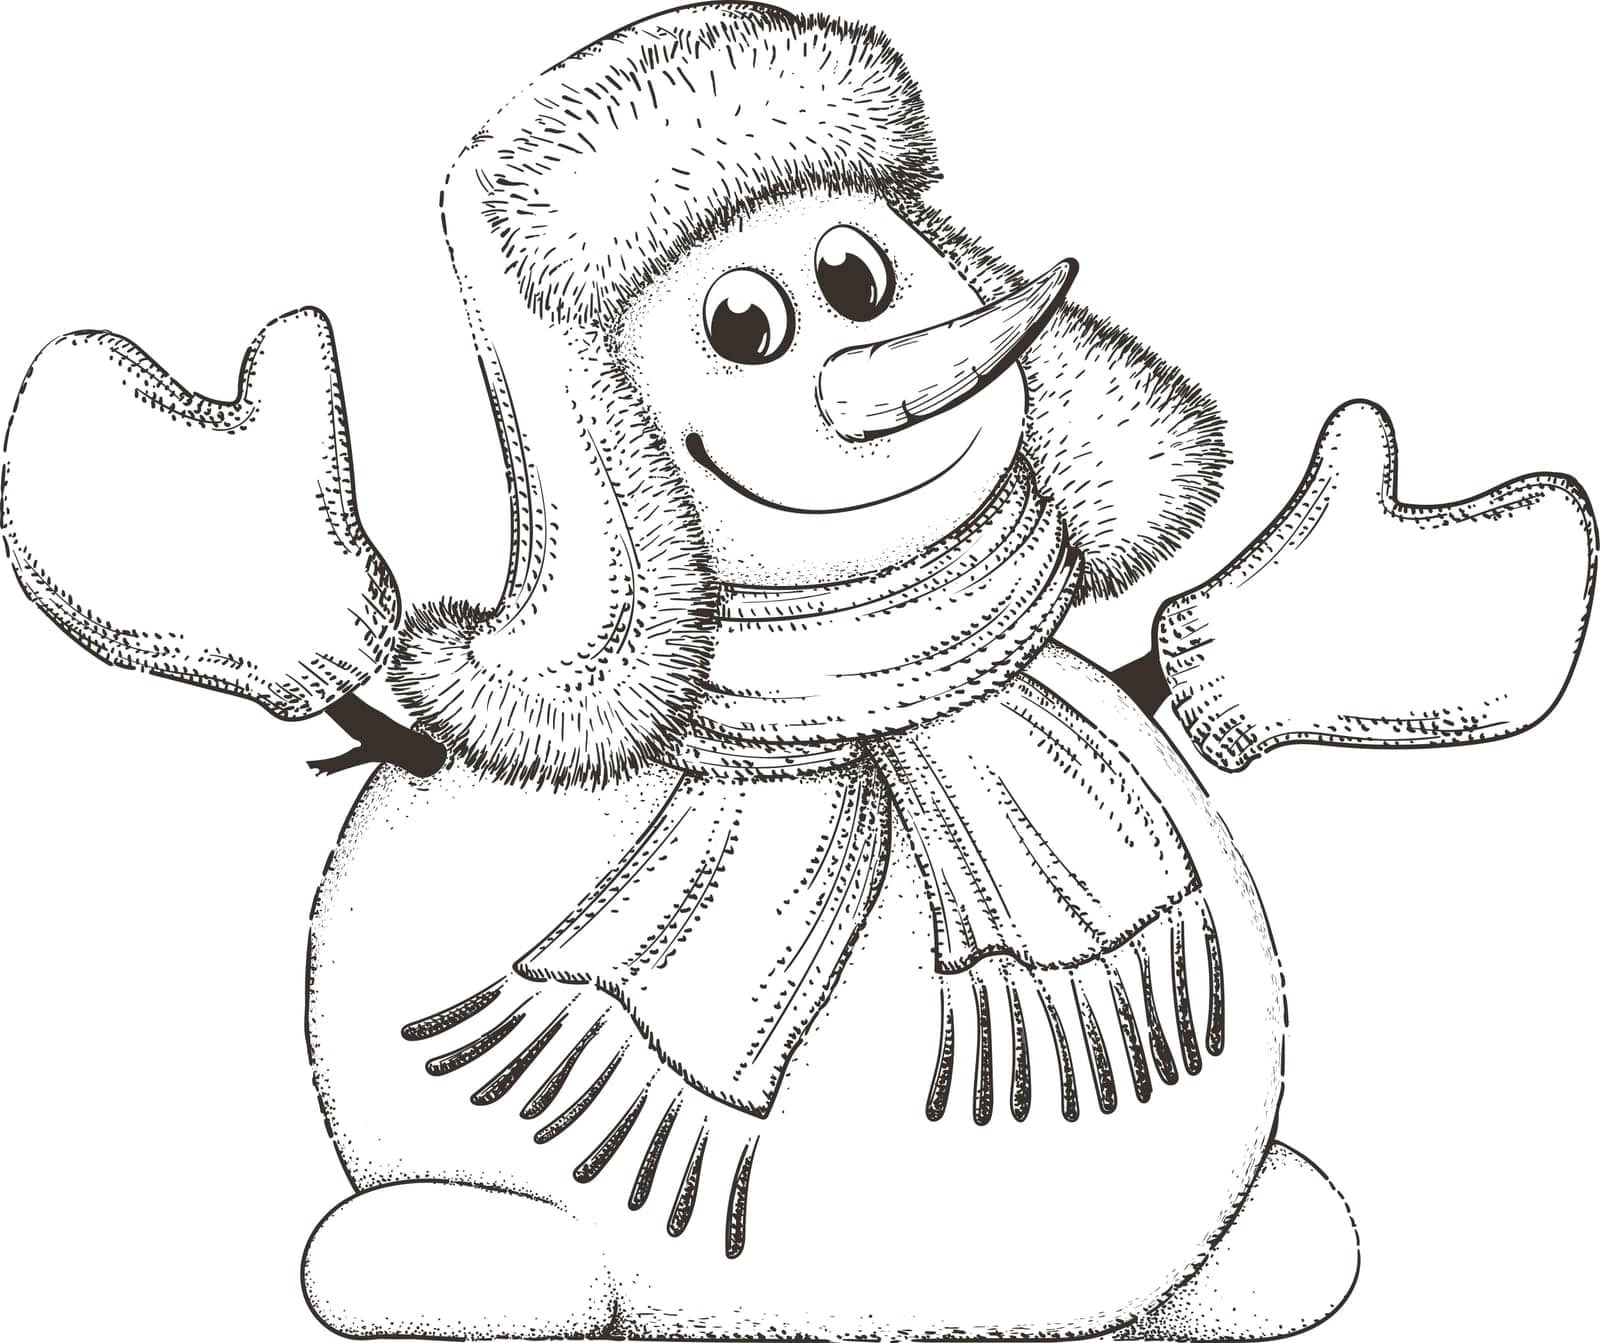 Snowman with a scarf, gloves and hat.Winter icon.Xmas and New Year elements.